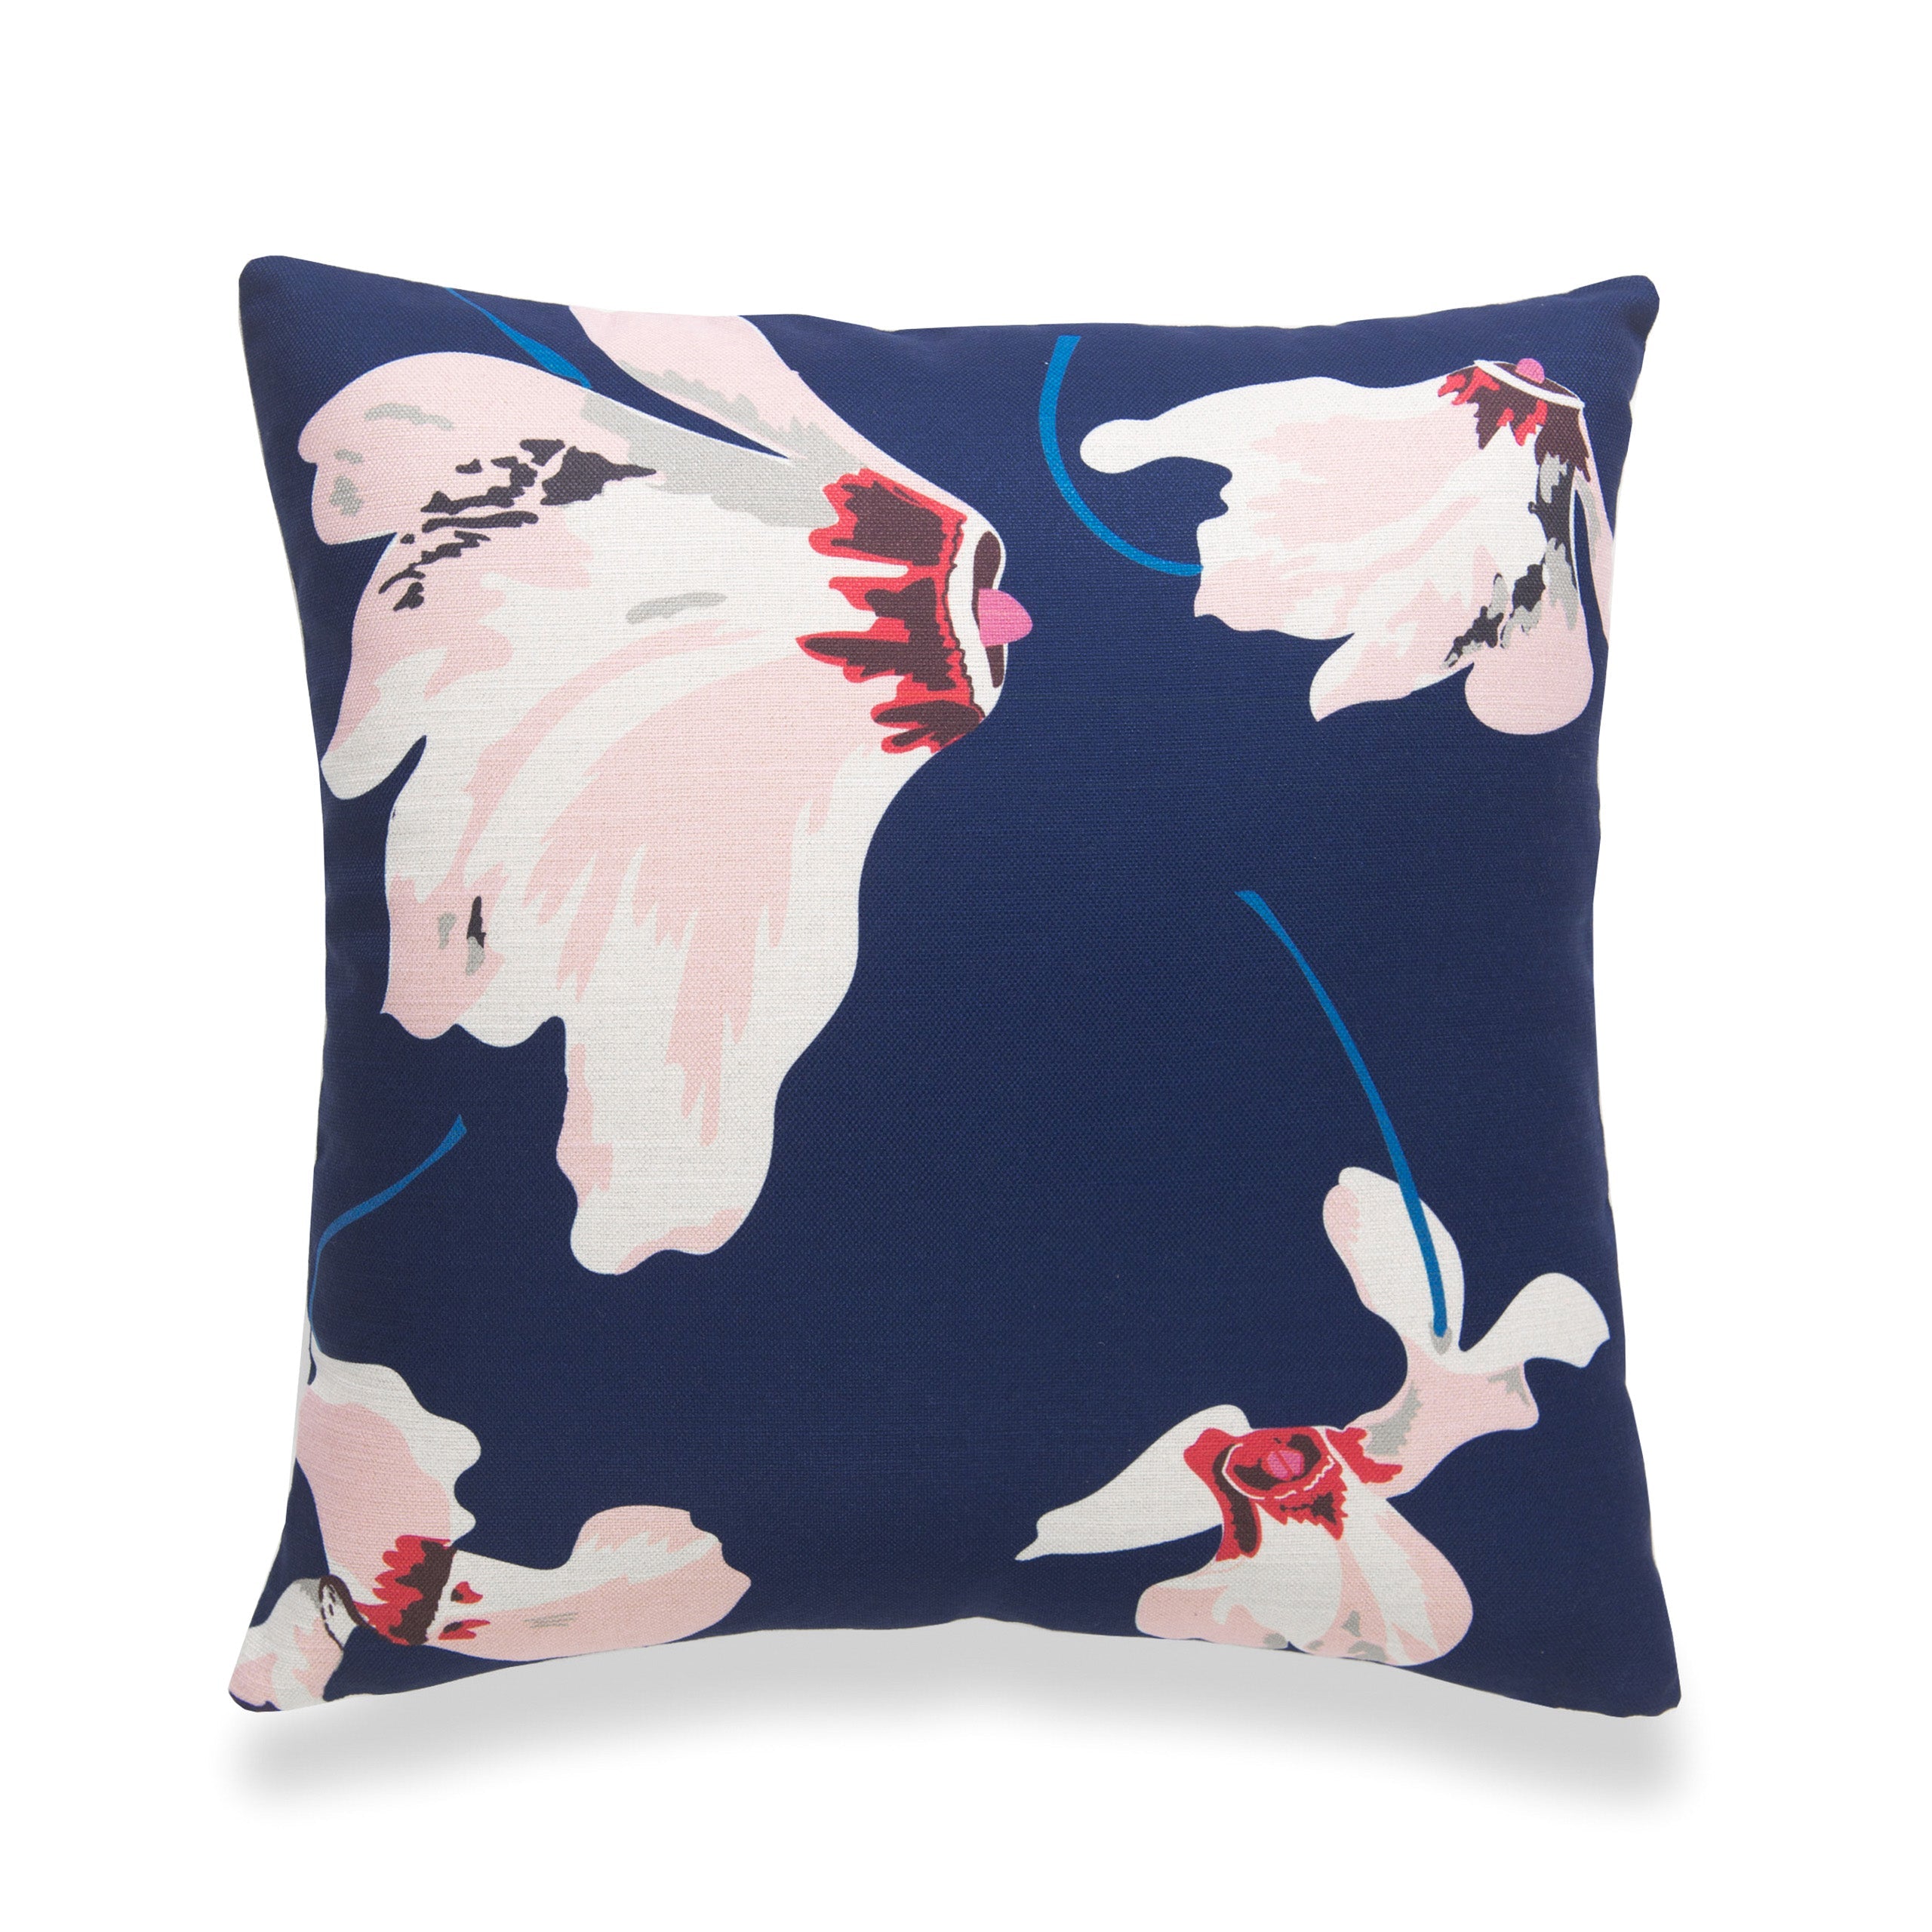 Spring Indoor Outdoor Pillow Cover, Floral, Navy Blue Pink, 18"x18"